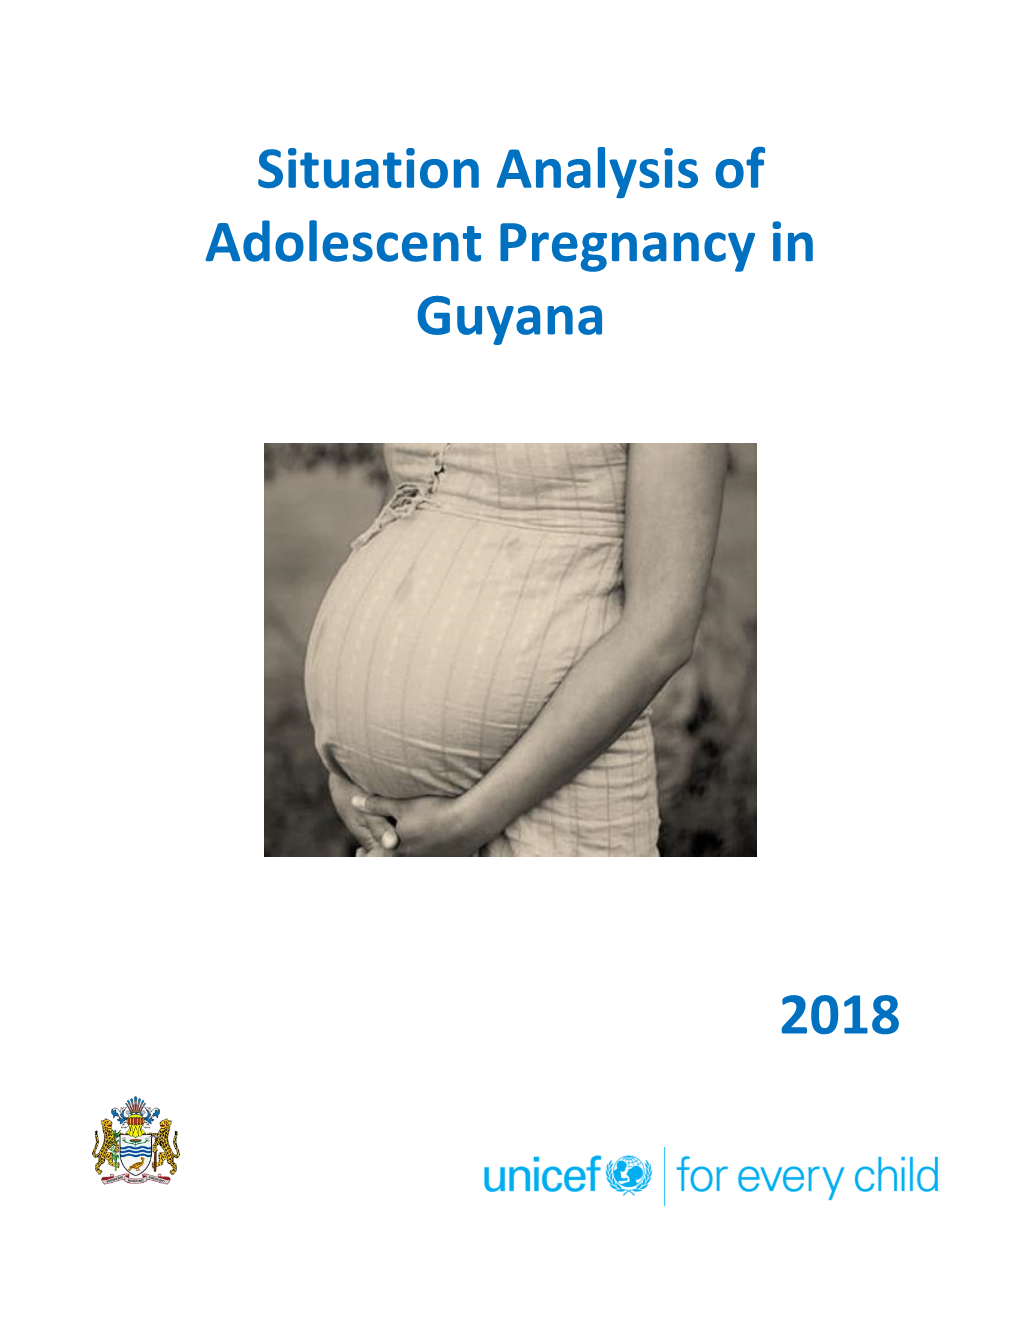 Situation Analysis of Adolescent Pregnancy in Guyana